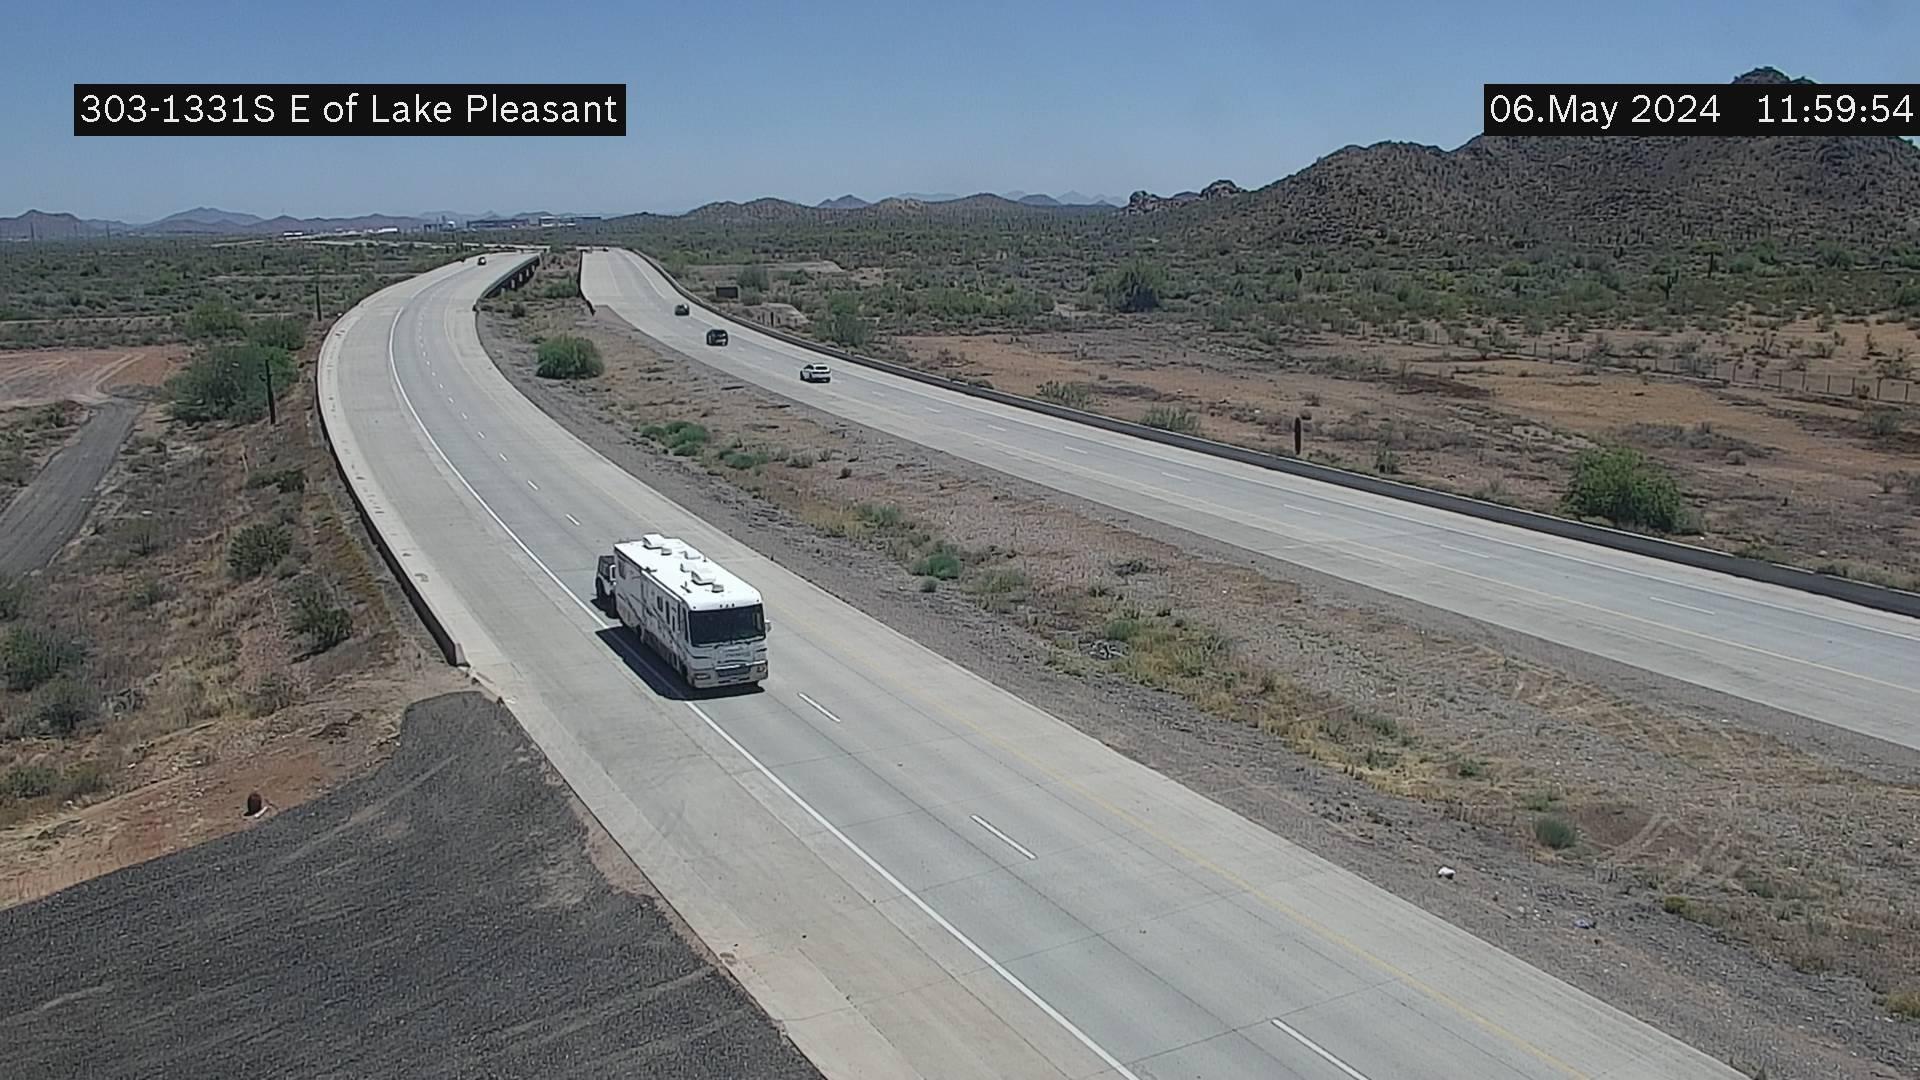 Traffic Cam Peoria › West: L-303 WB 133.10 @E of Lake Pleasant Pkwy Player